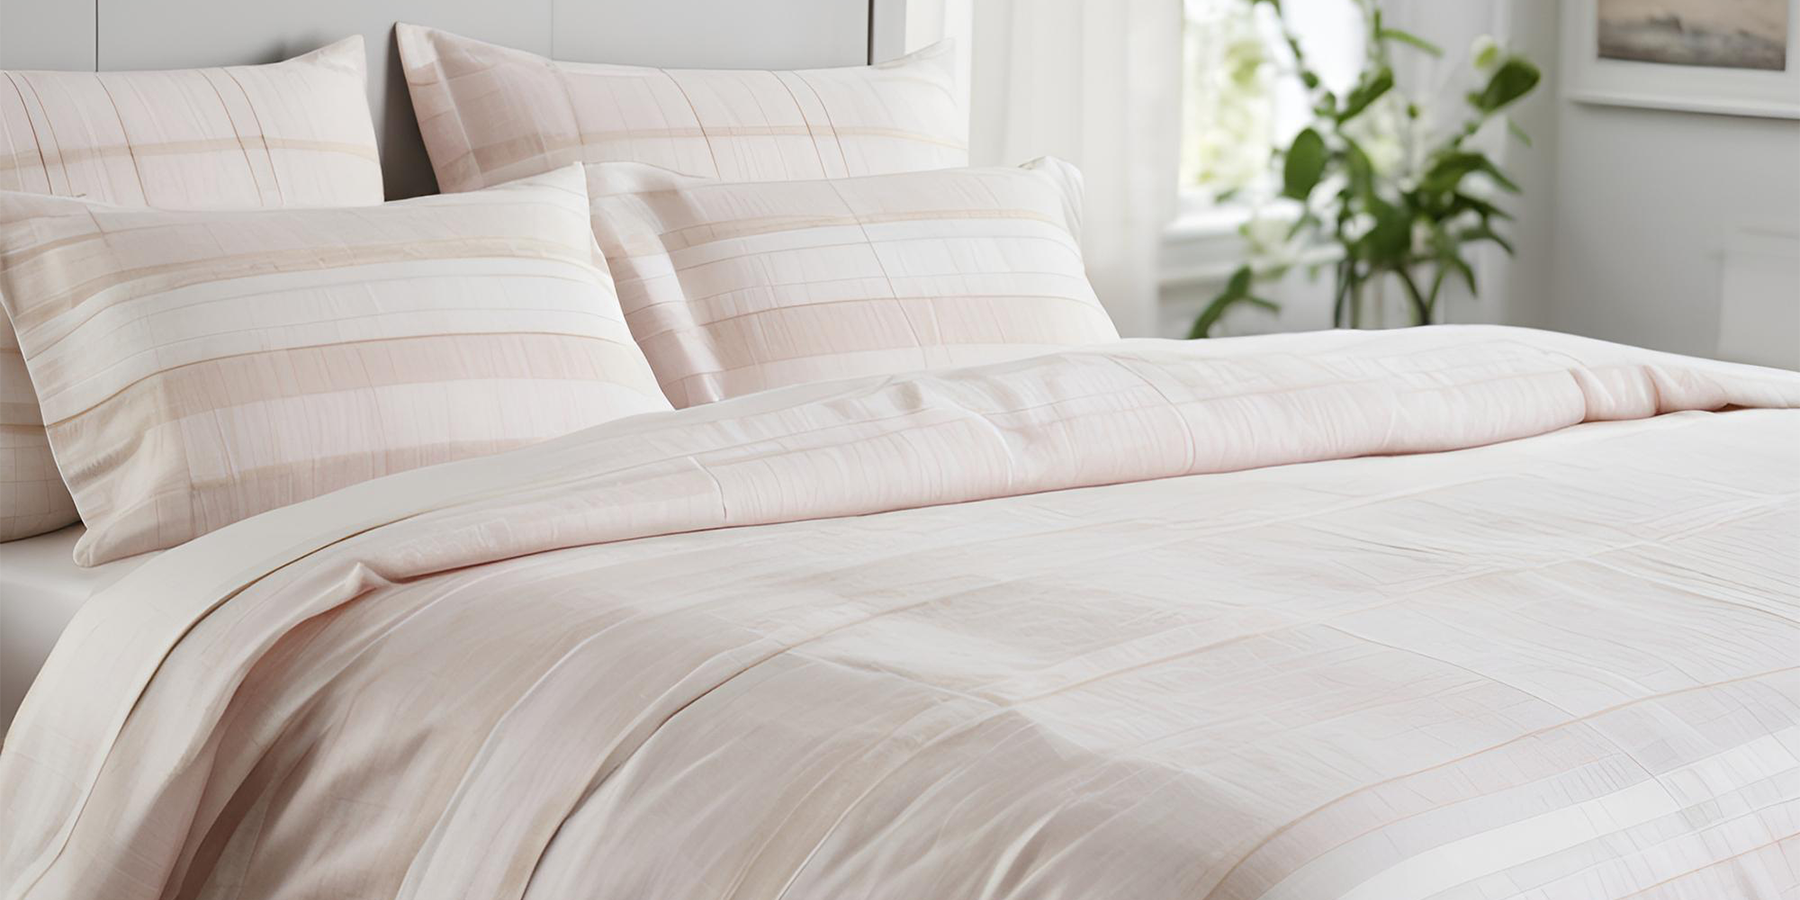 Bed Linen image